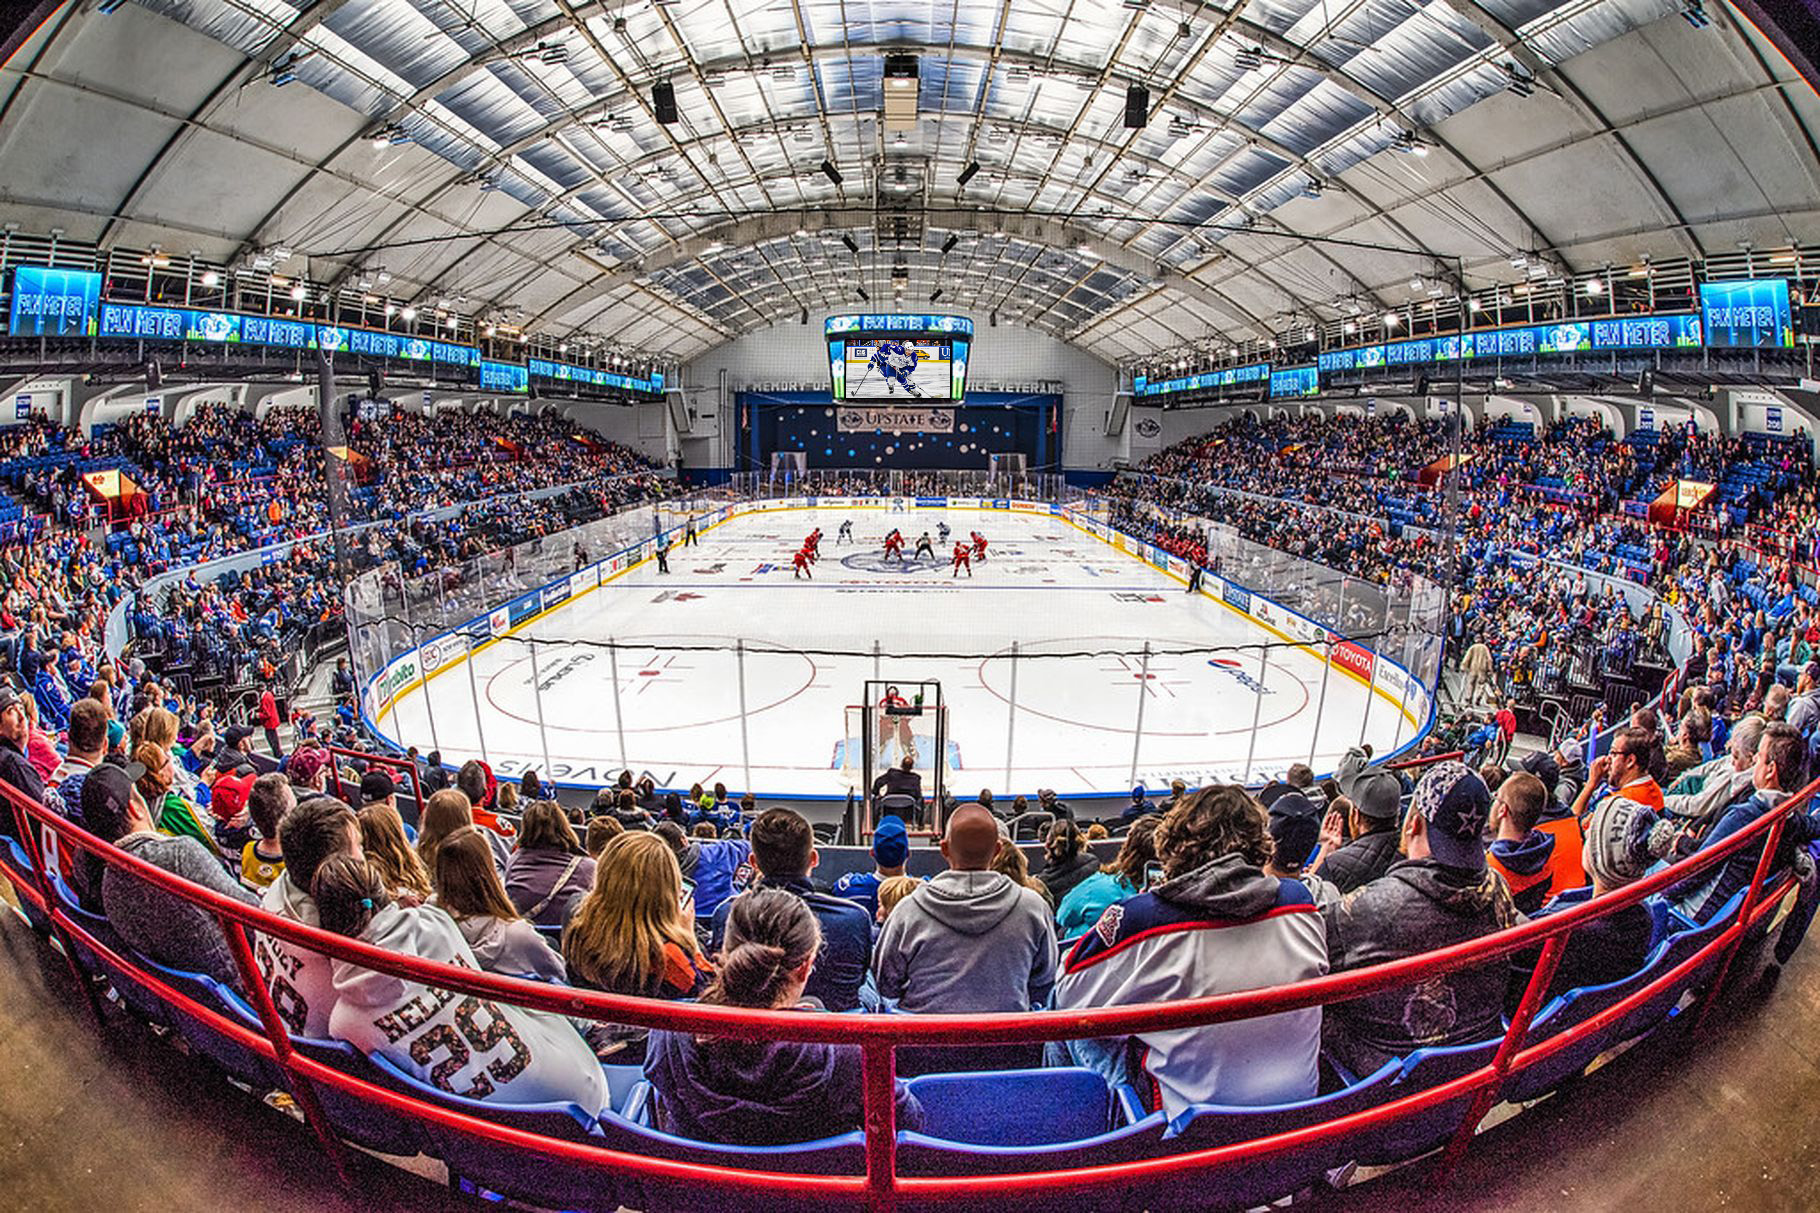 Syracuse Crunch, Control Room Broadcast Cabling, Cabling infrastructure, structured cabling, LED display, videoboard, scoreboard, center hung, centerhung, center-hung, AHL, hockey, American Hockey League, marquee, arena LED, screens, scoreboard, video control system, IPTV, AJP